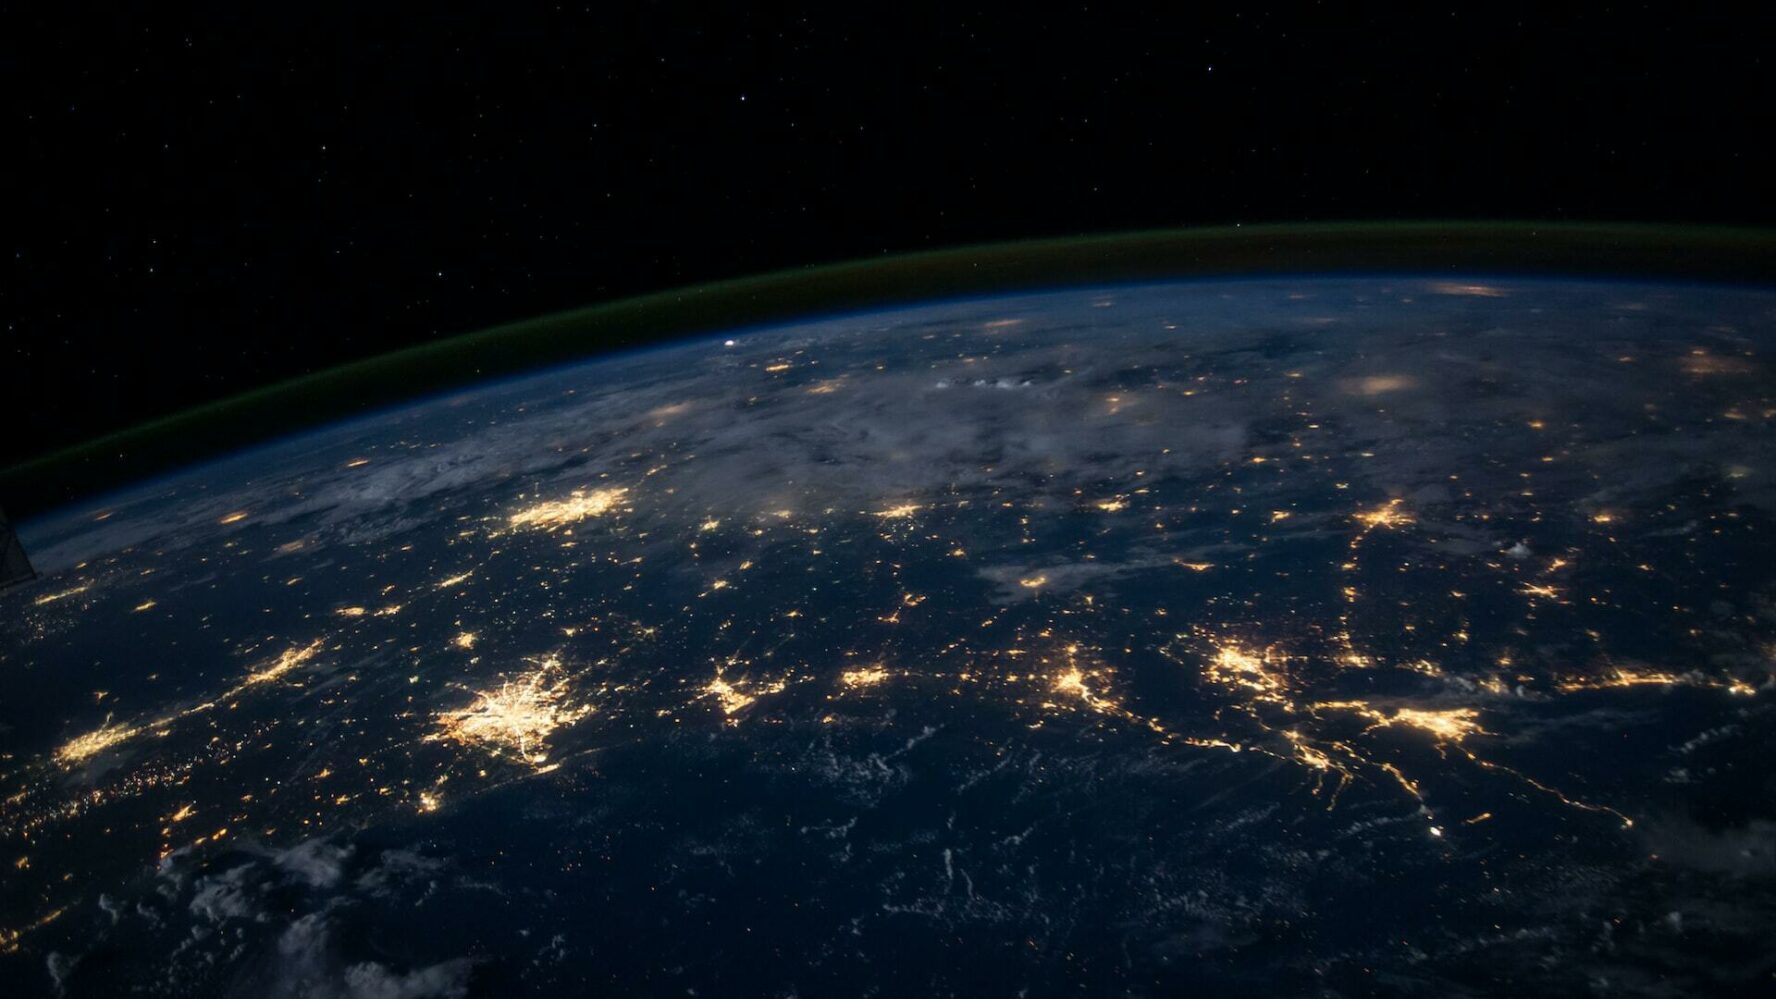 Cities on the earth lit up by electricity viewed from space.